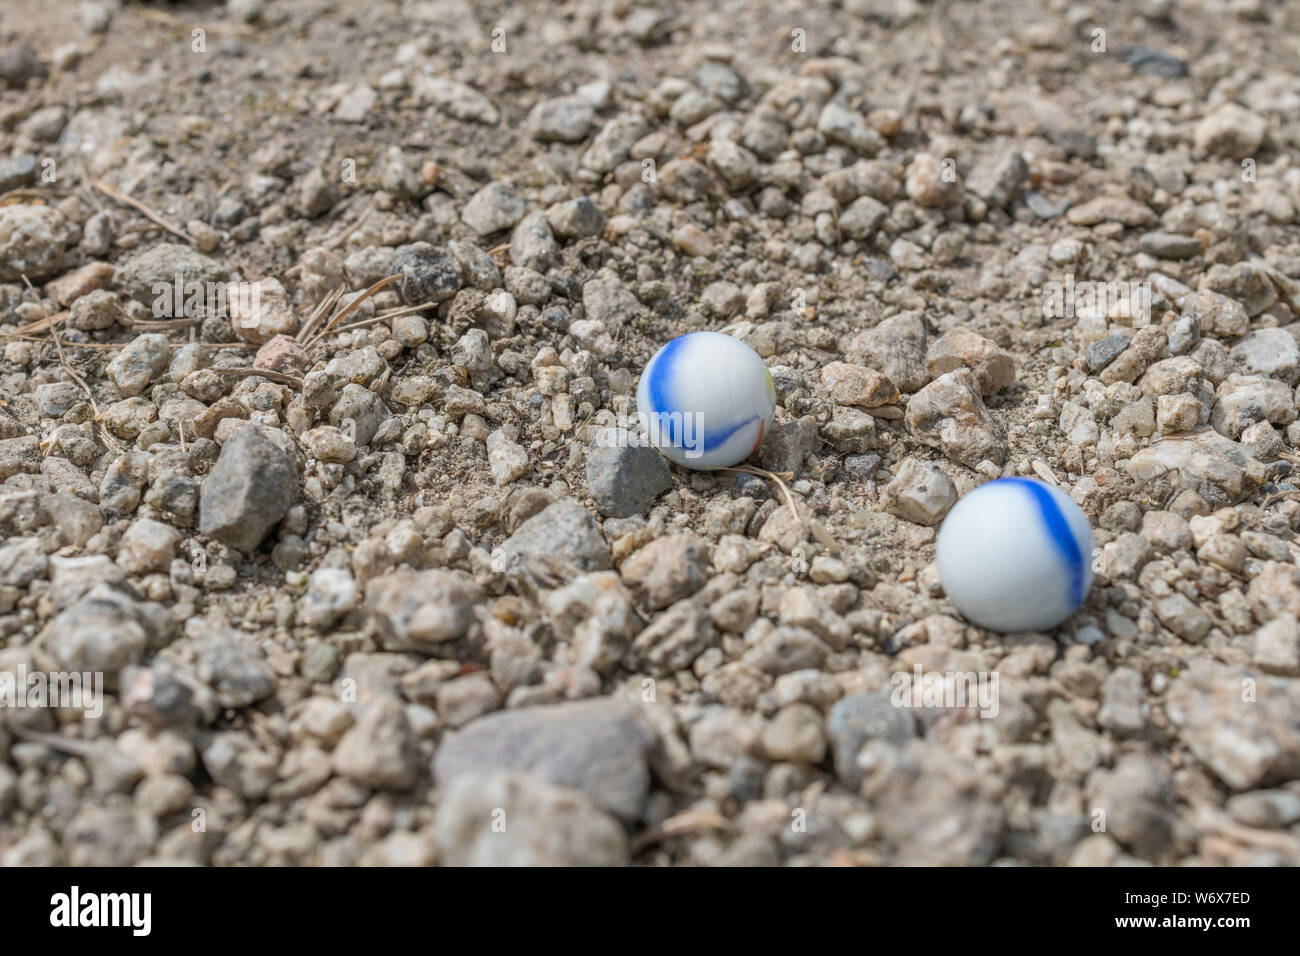 White glass marbles on gravel. Metaphor something lost, mental health, losing your marbles, childhood games, losing the plot, losing it. Stock Photo